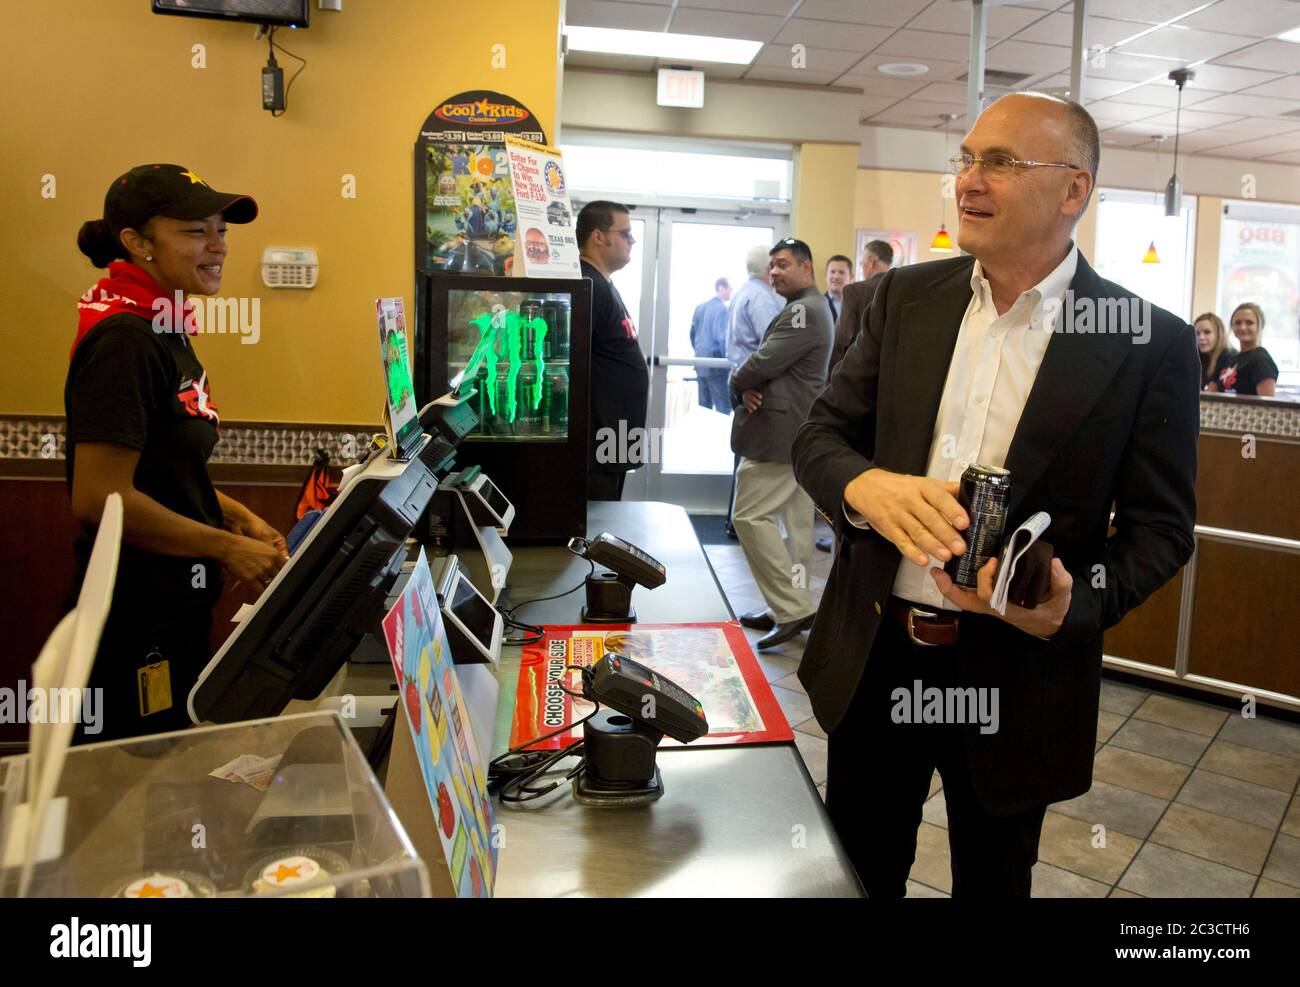 Austin Texas USA, August 6 2014: Carl's Jr. Restaurant CEO Andrew Puzder greets employees at an Austin location of the fast-food chain.  ©Marjorie Kamys Cotera/Daemmrich Photography Stock Photo